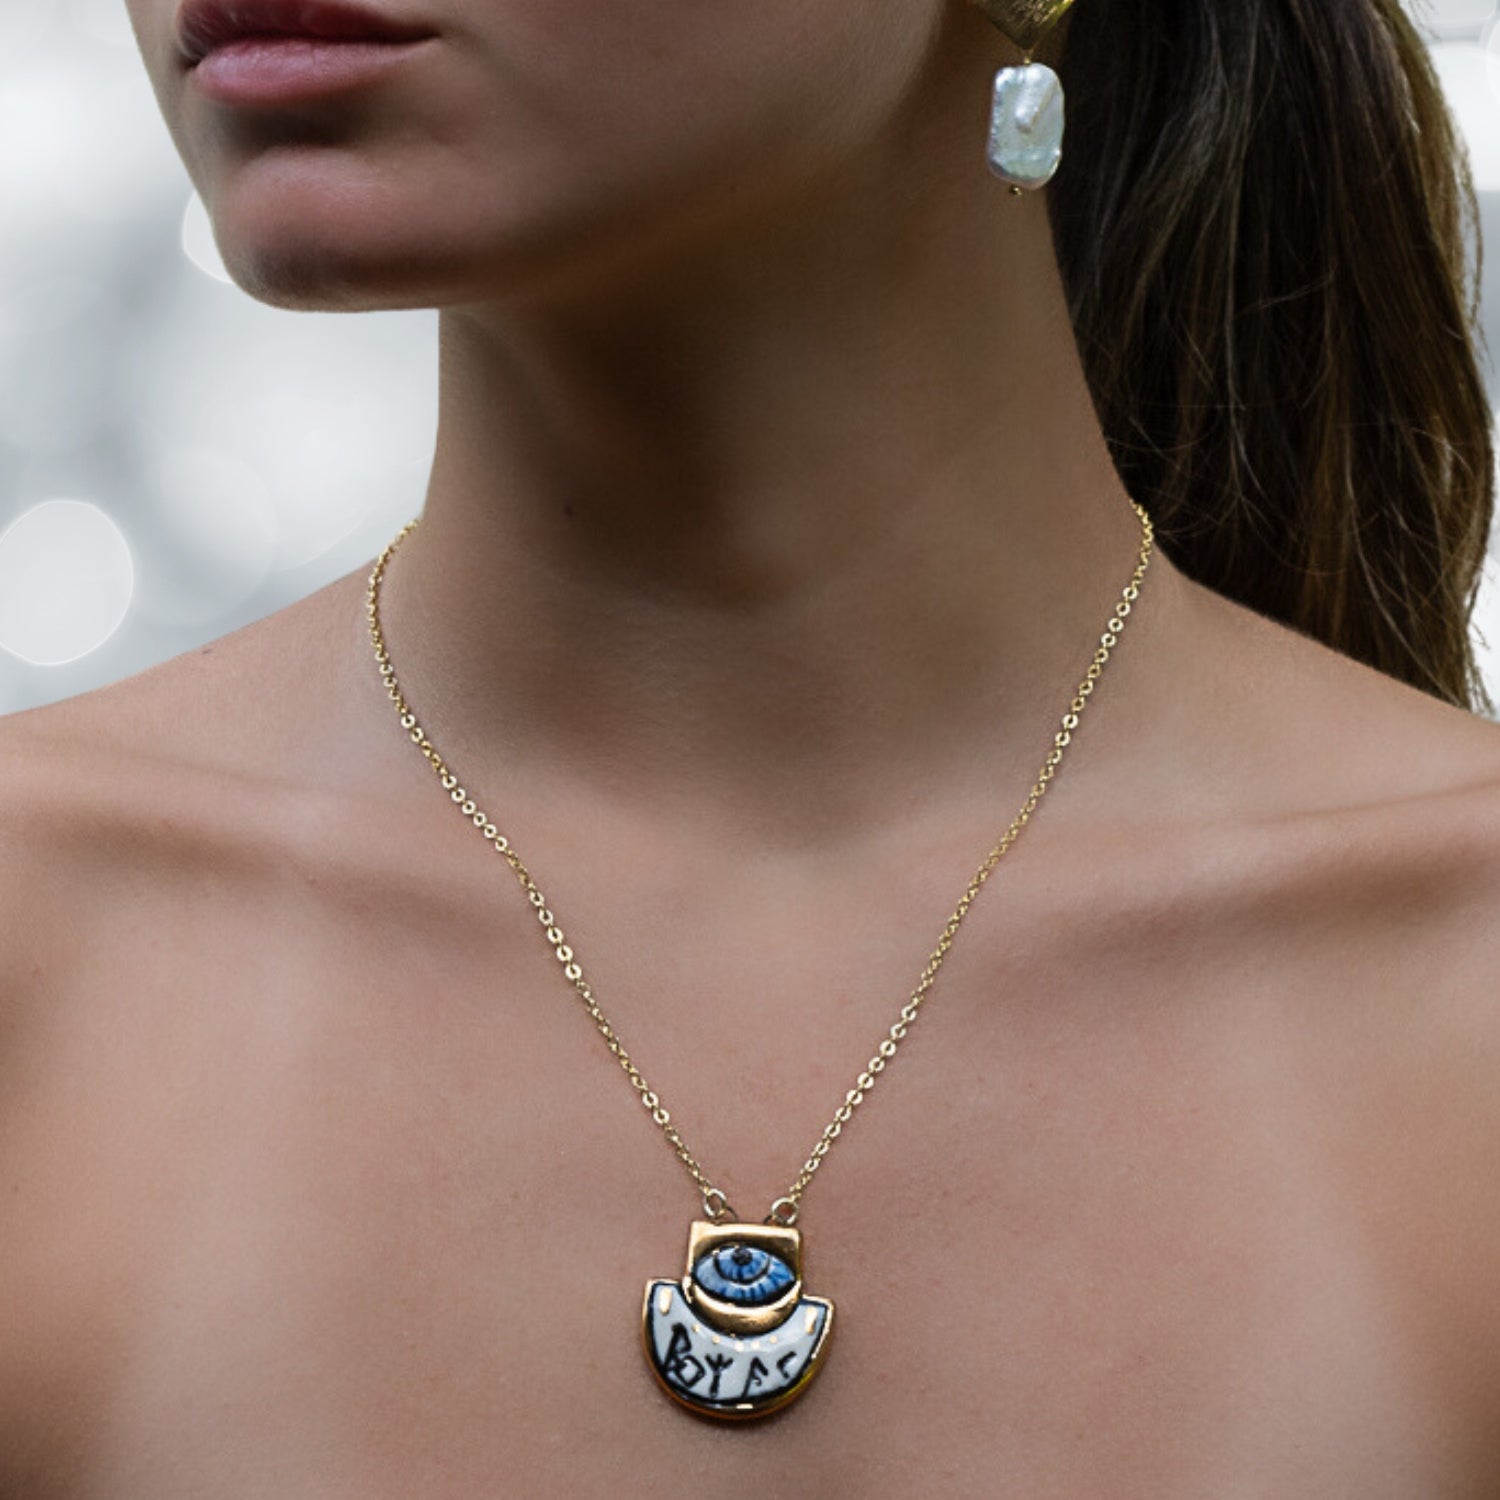 Symbols of Guidance and Protection - The model exemplifies the necklace&#39;s talismanic qualities.